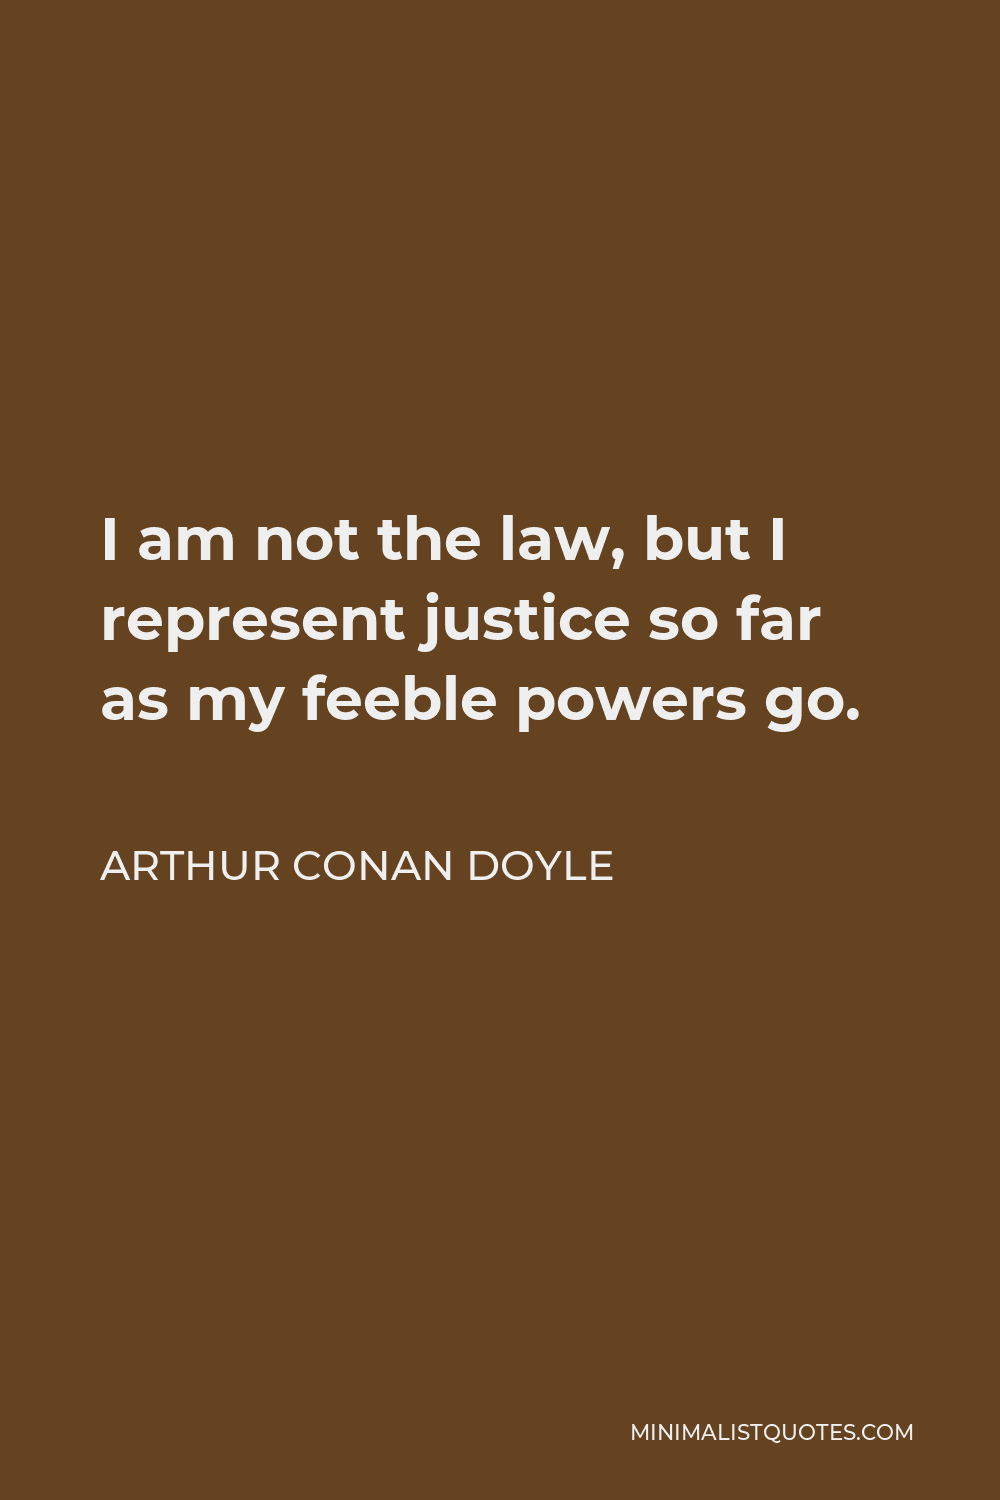 Arthur Conan Doyle Quote - I am not the law, but I represent justice so far as my feeble powers go.